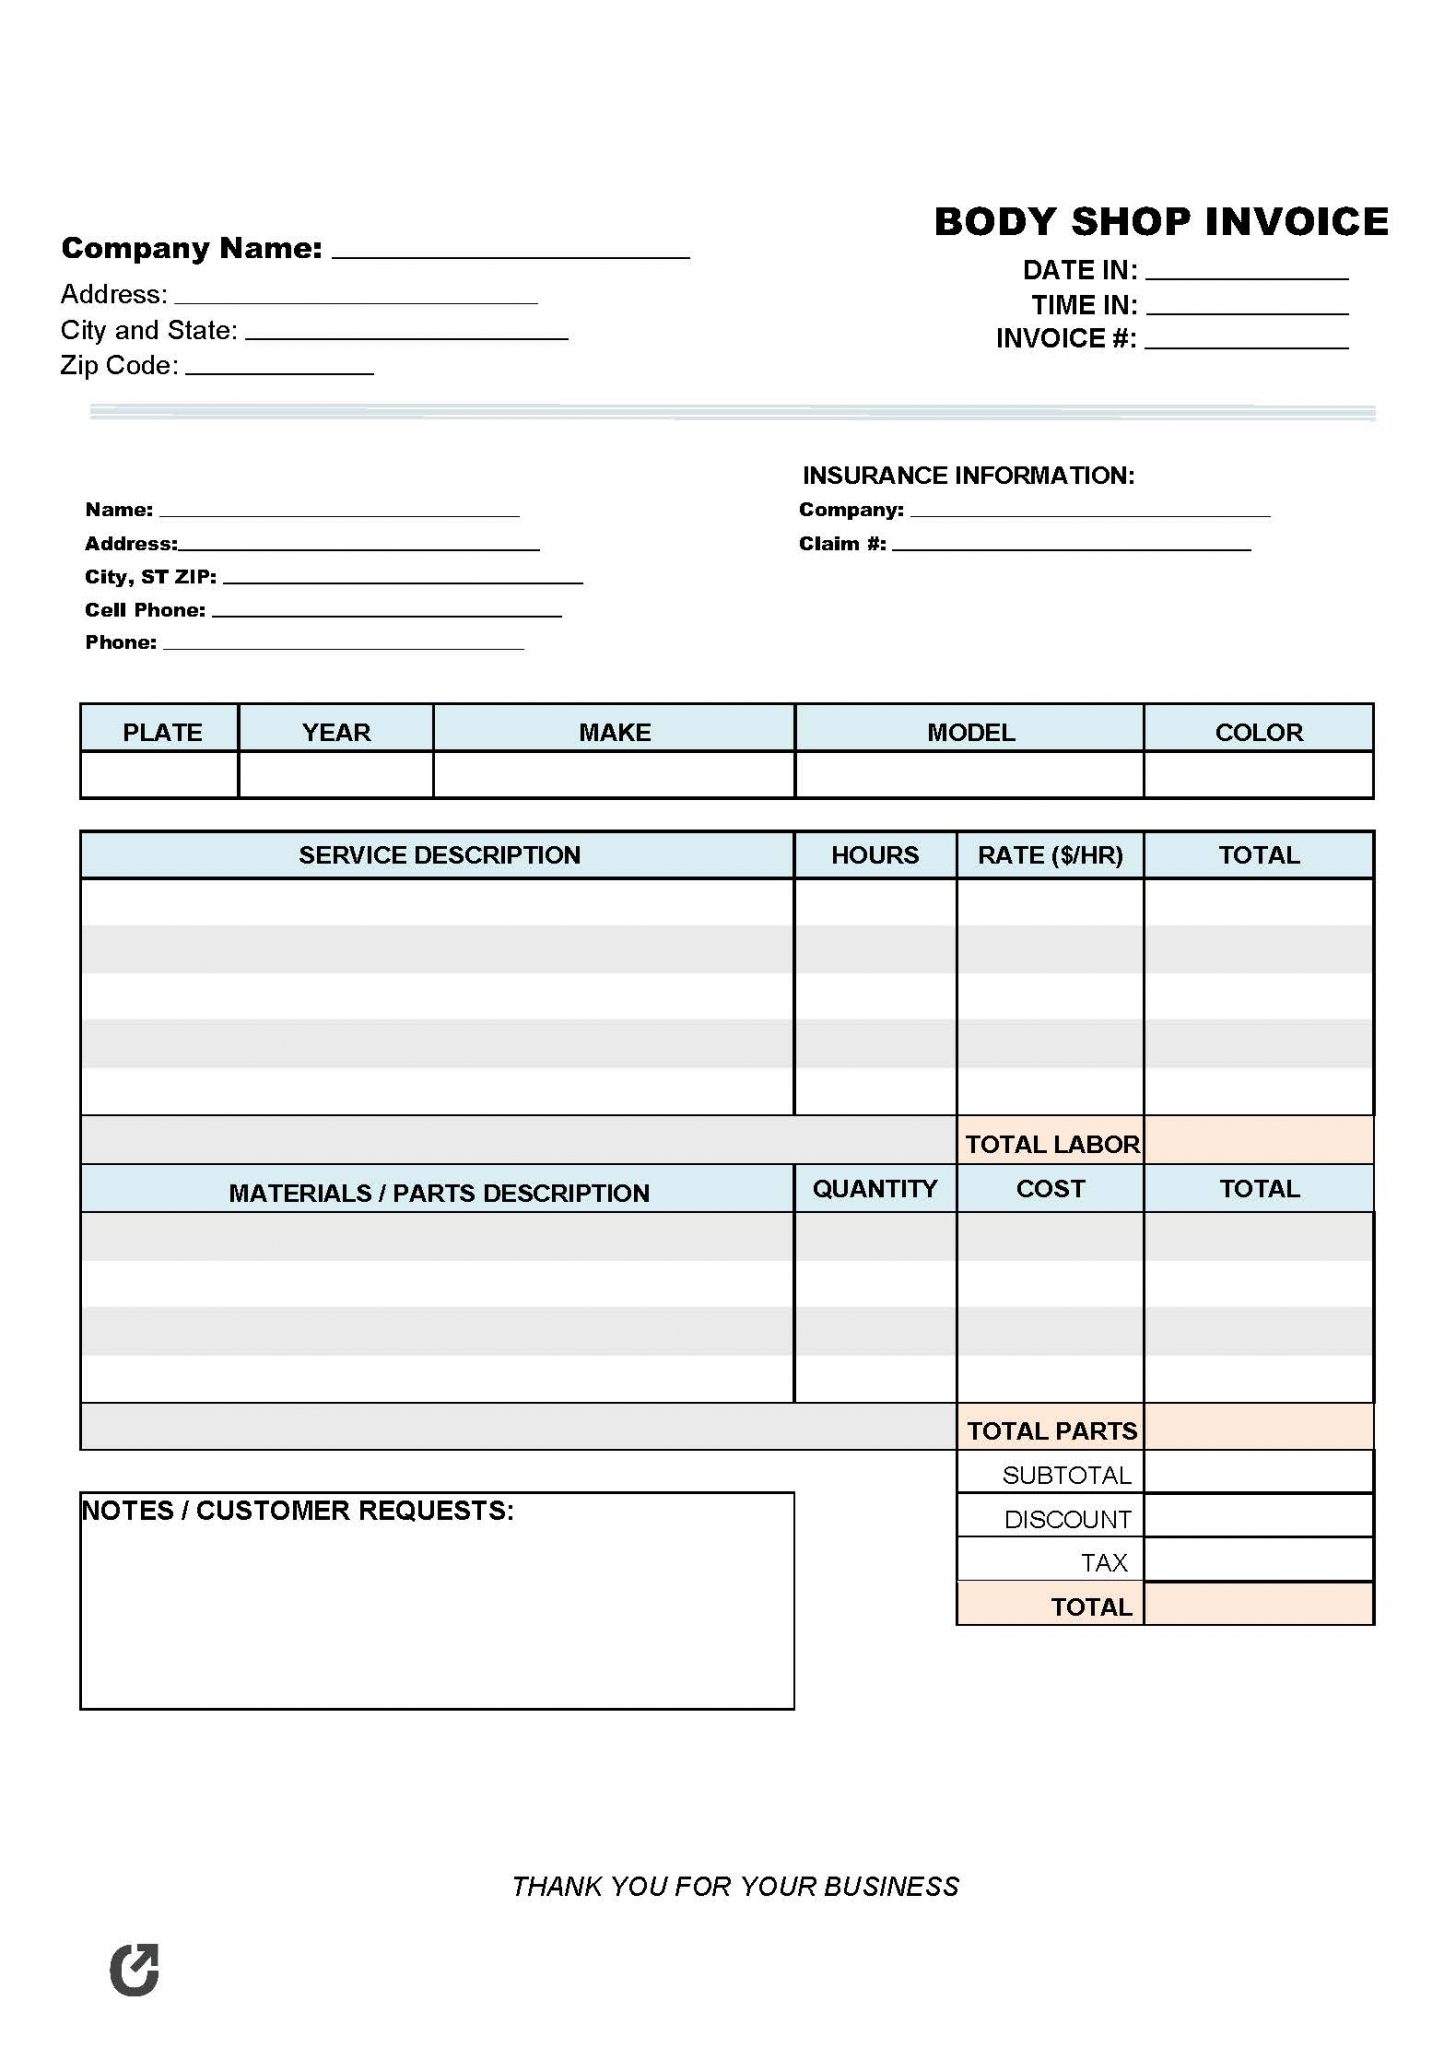 Free Service Invoice Templates PDF WORD EXCEL